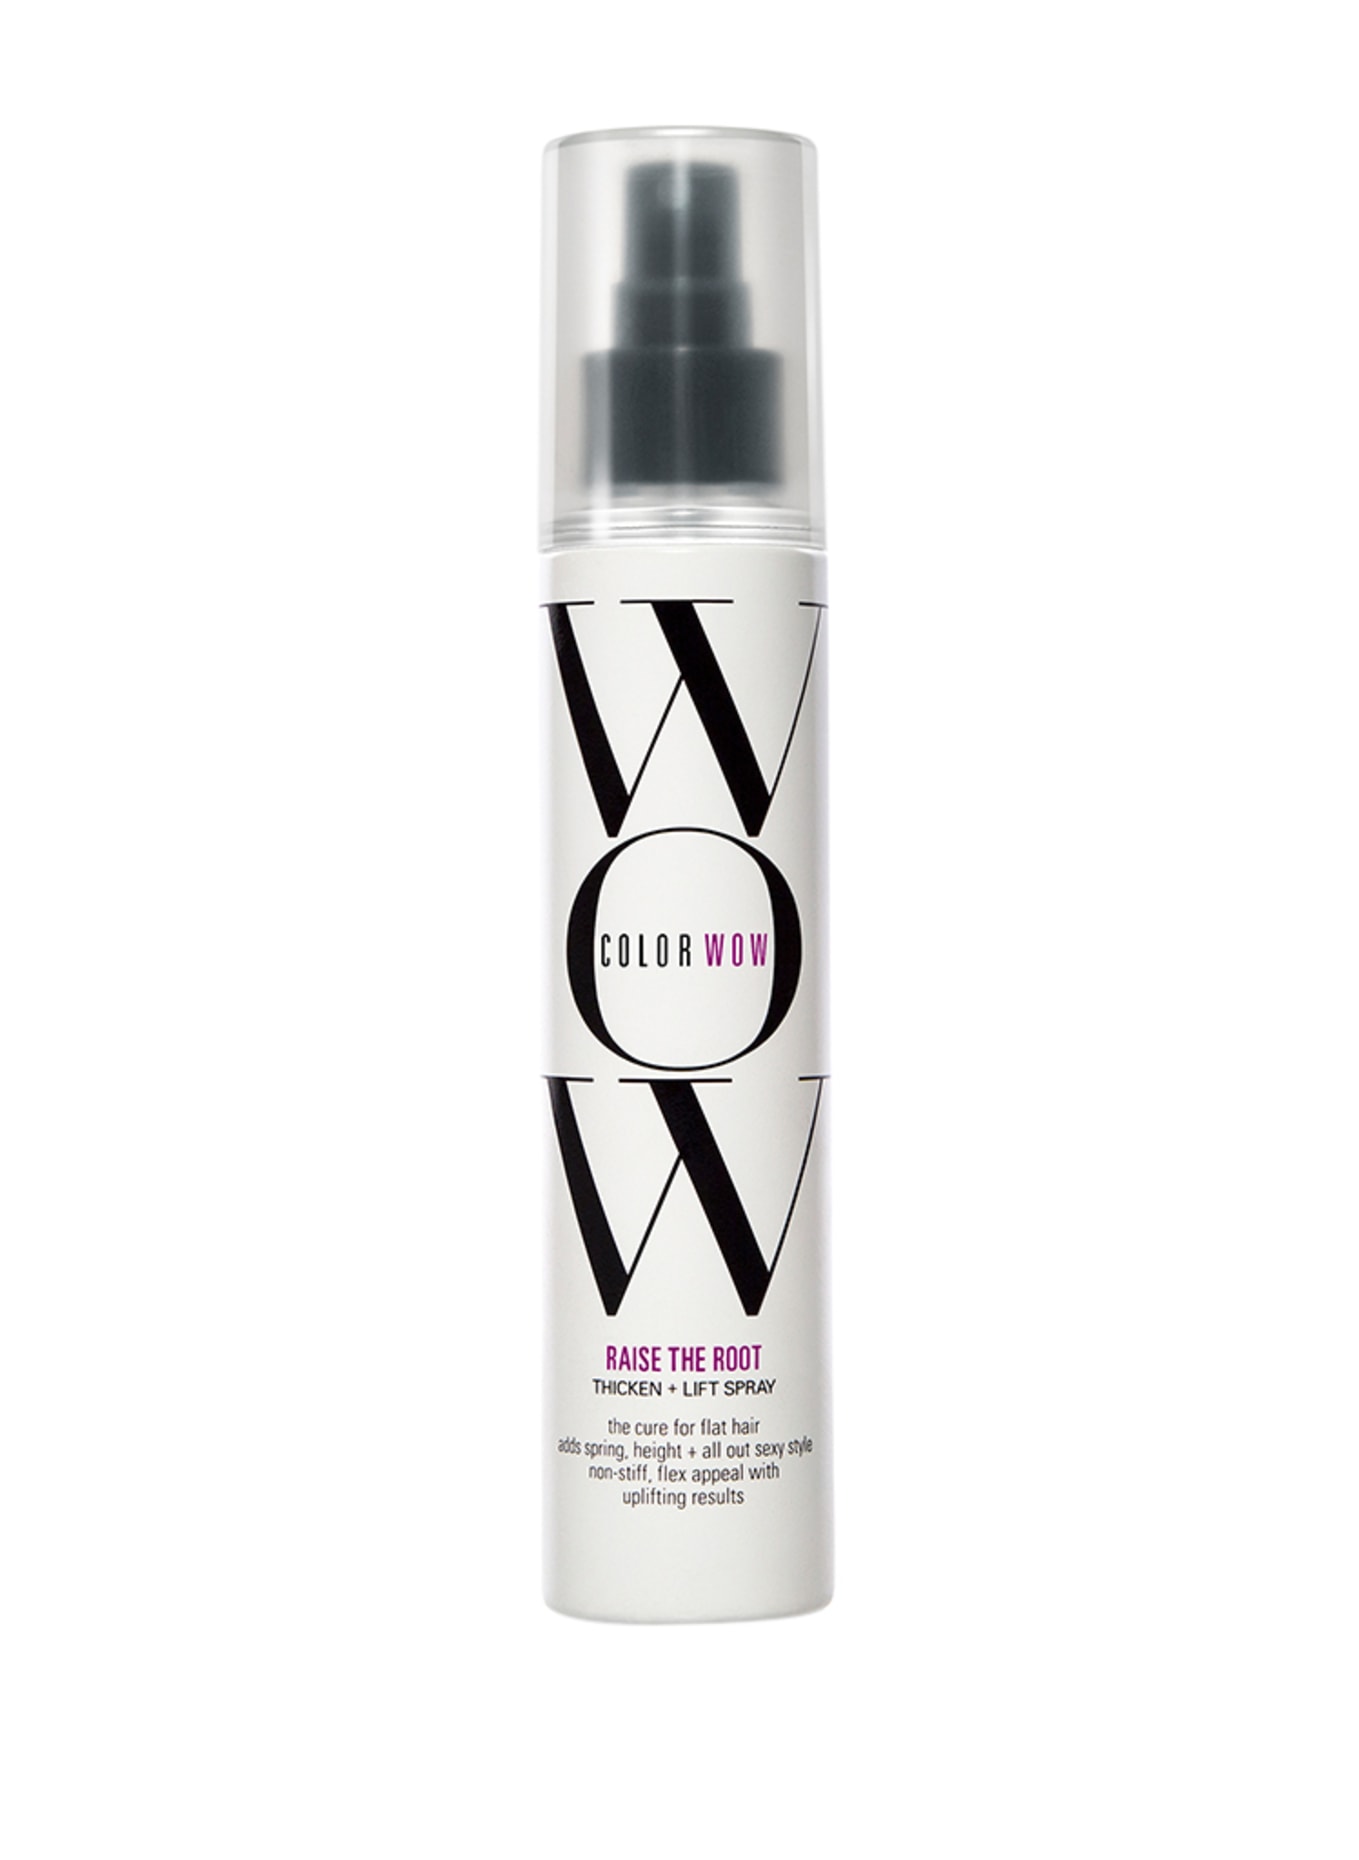 COLOR WOW RAISE THE ROOT THICKEN + LIFT SPRAY (Obrazek 1)